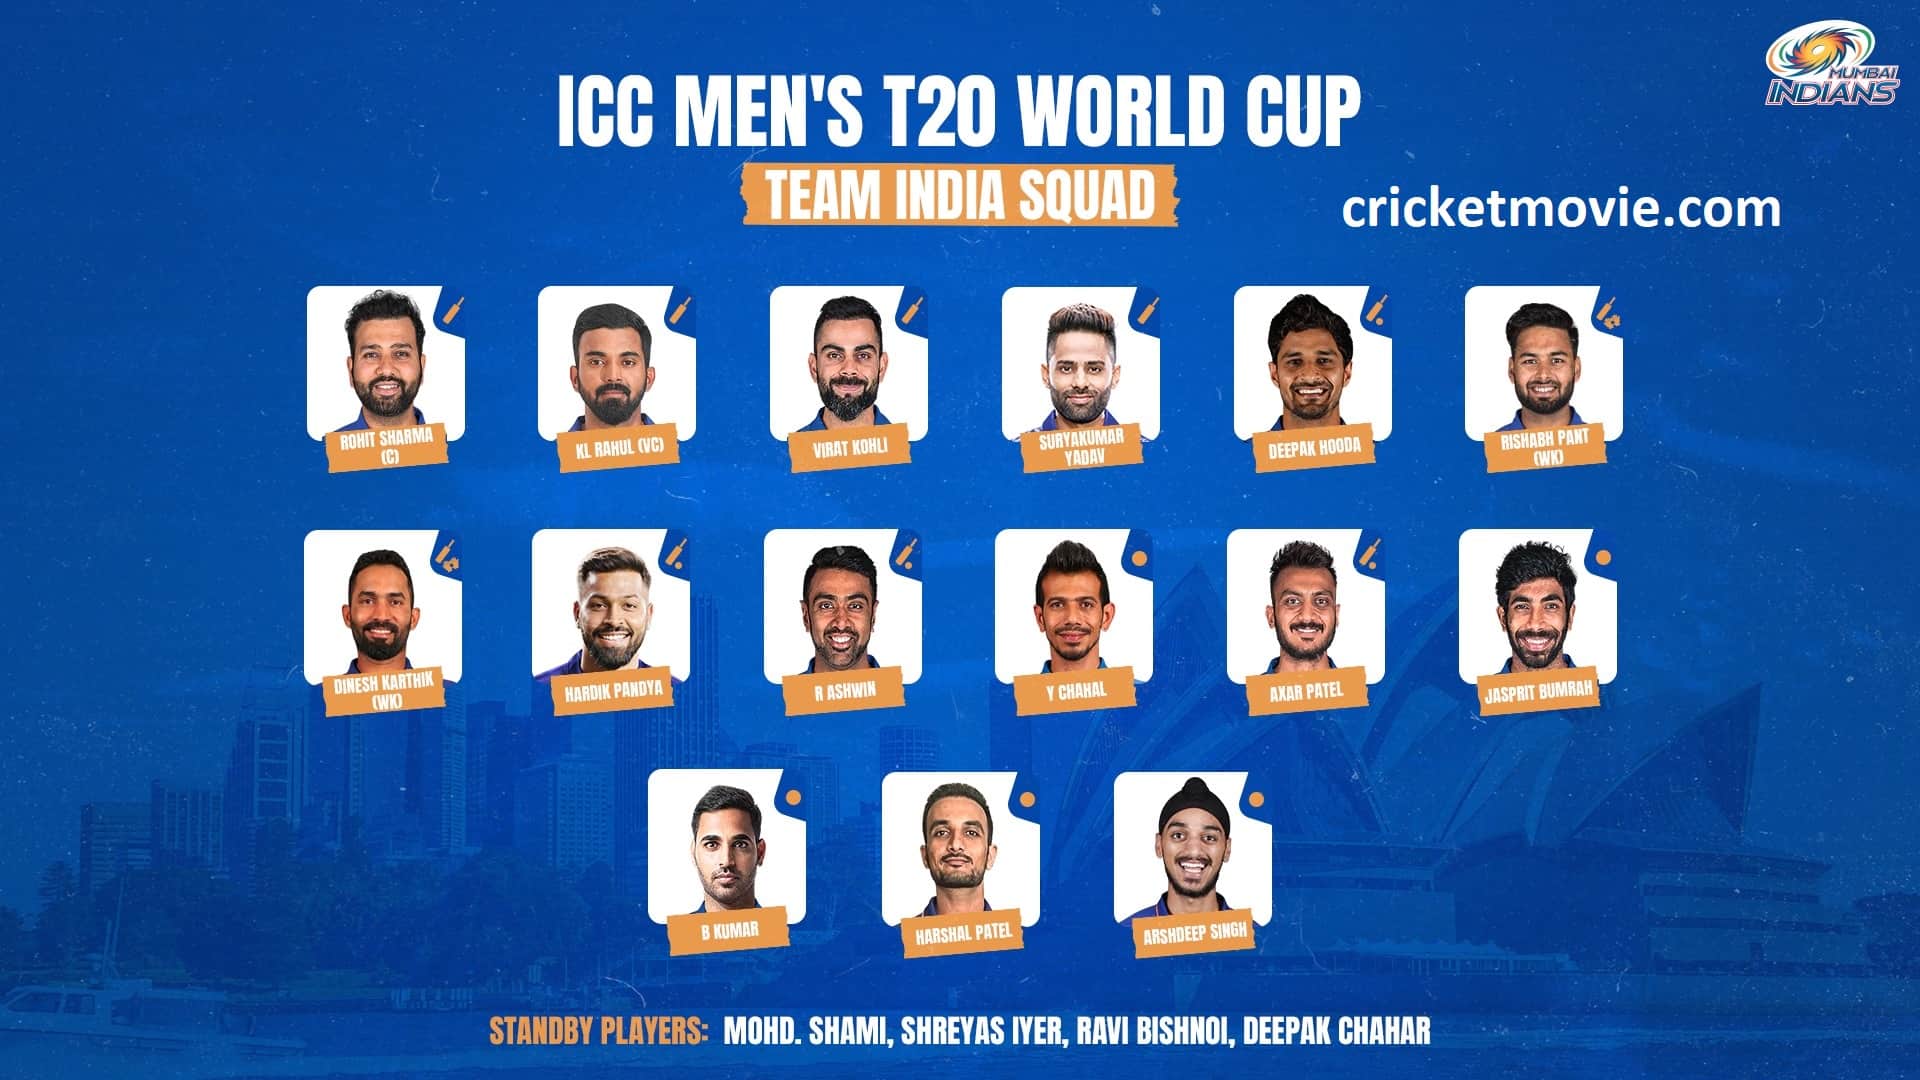 BCCI announced Team India squad for home series and T20 World